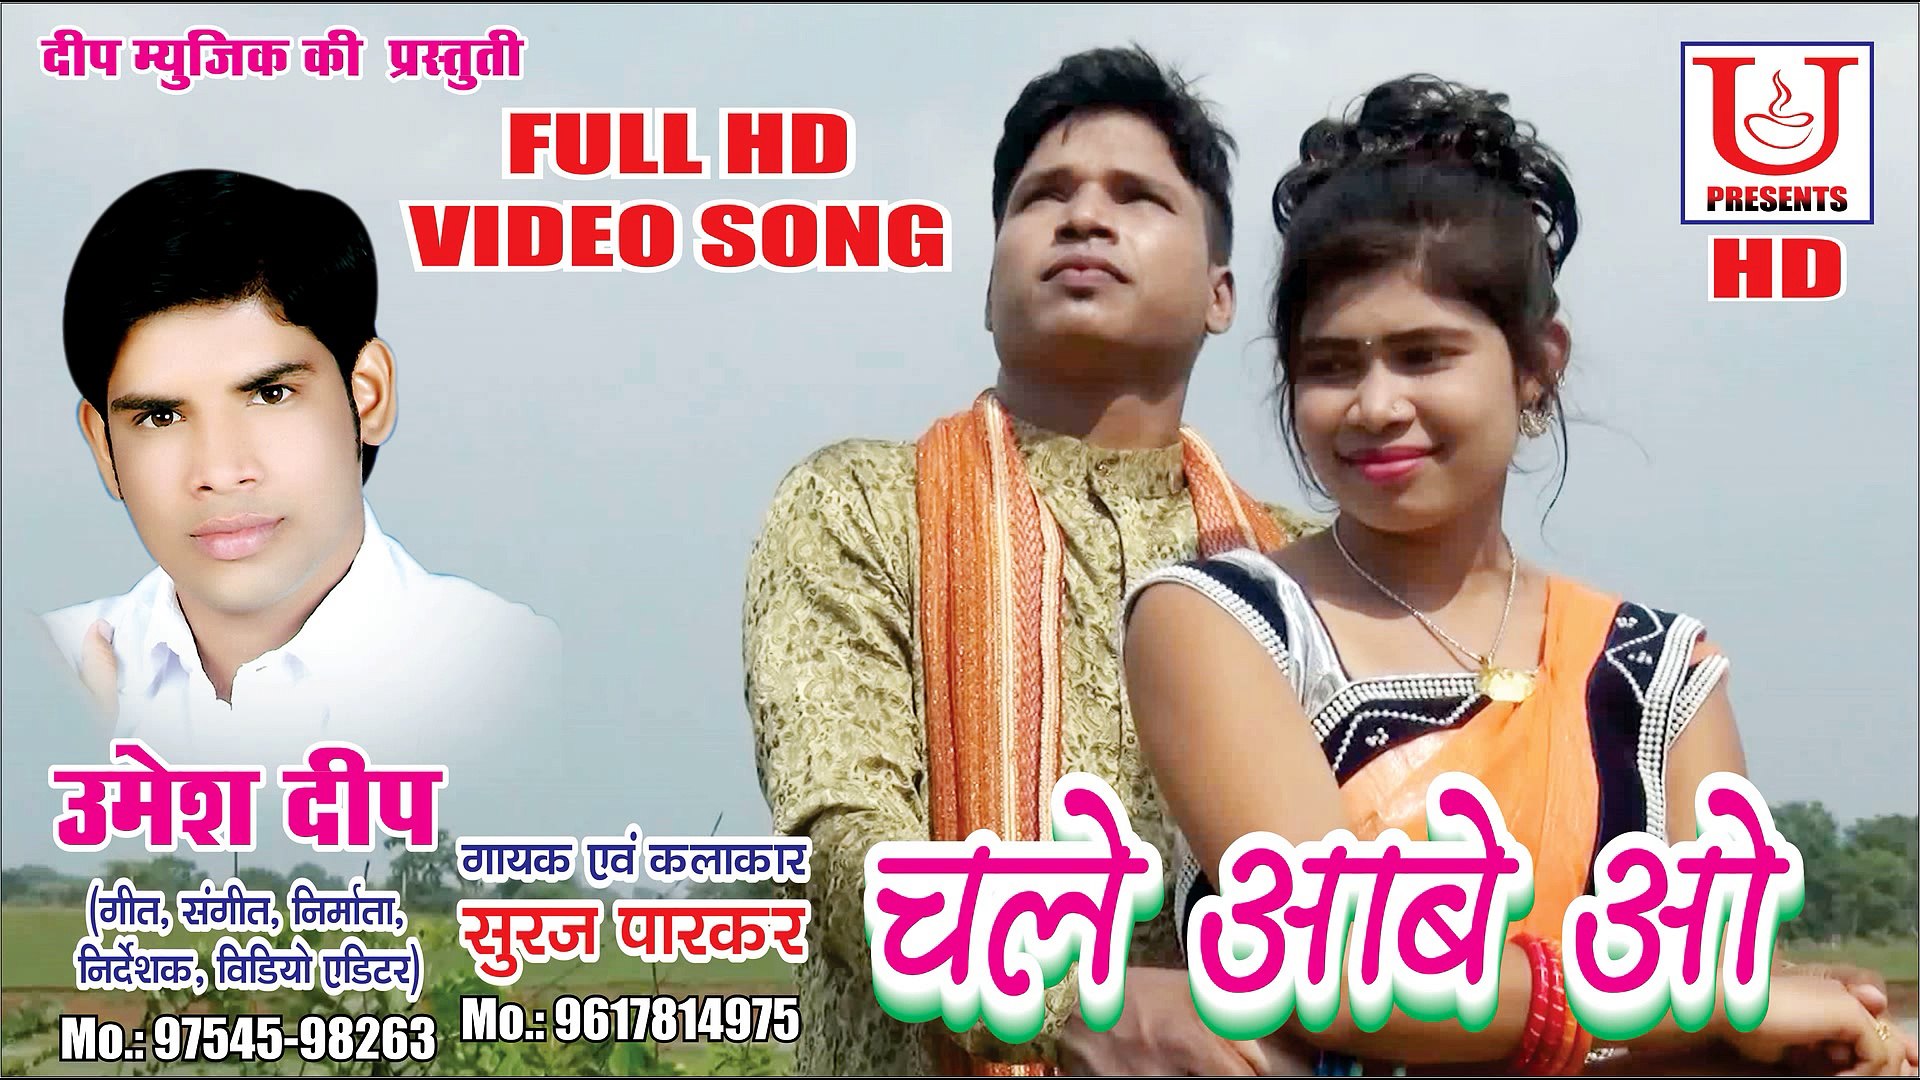 CG SONG - CHALE AABE O GORI FULL HD VIDEO SONG BY UMESH DEEP - video  Dailymotion